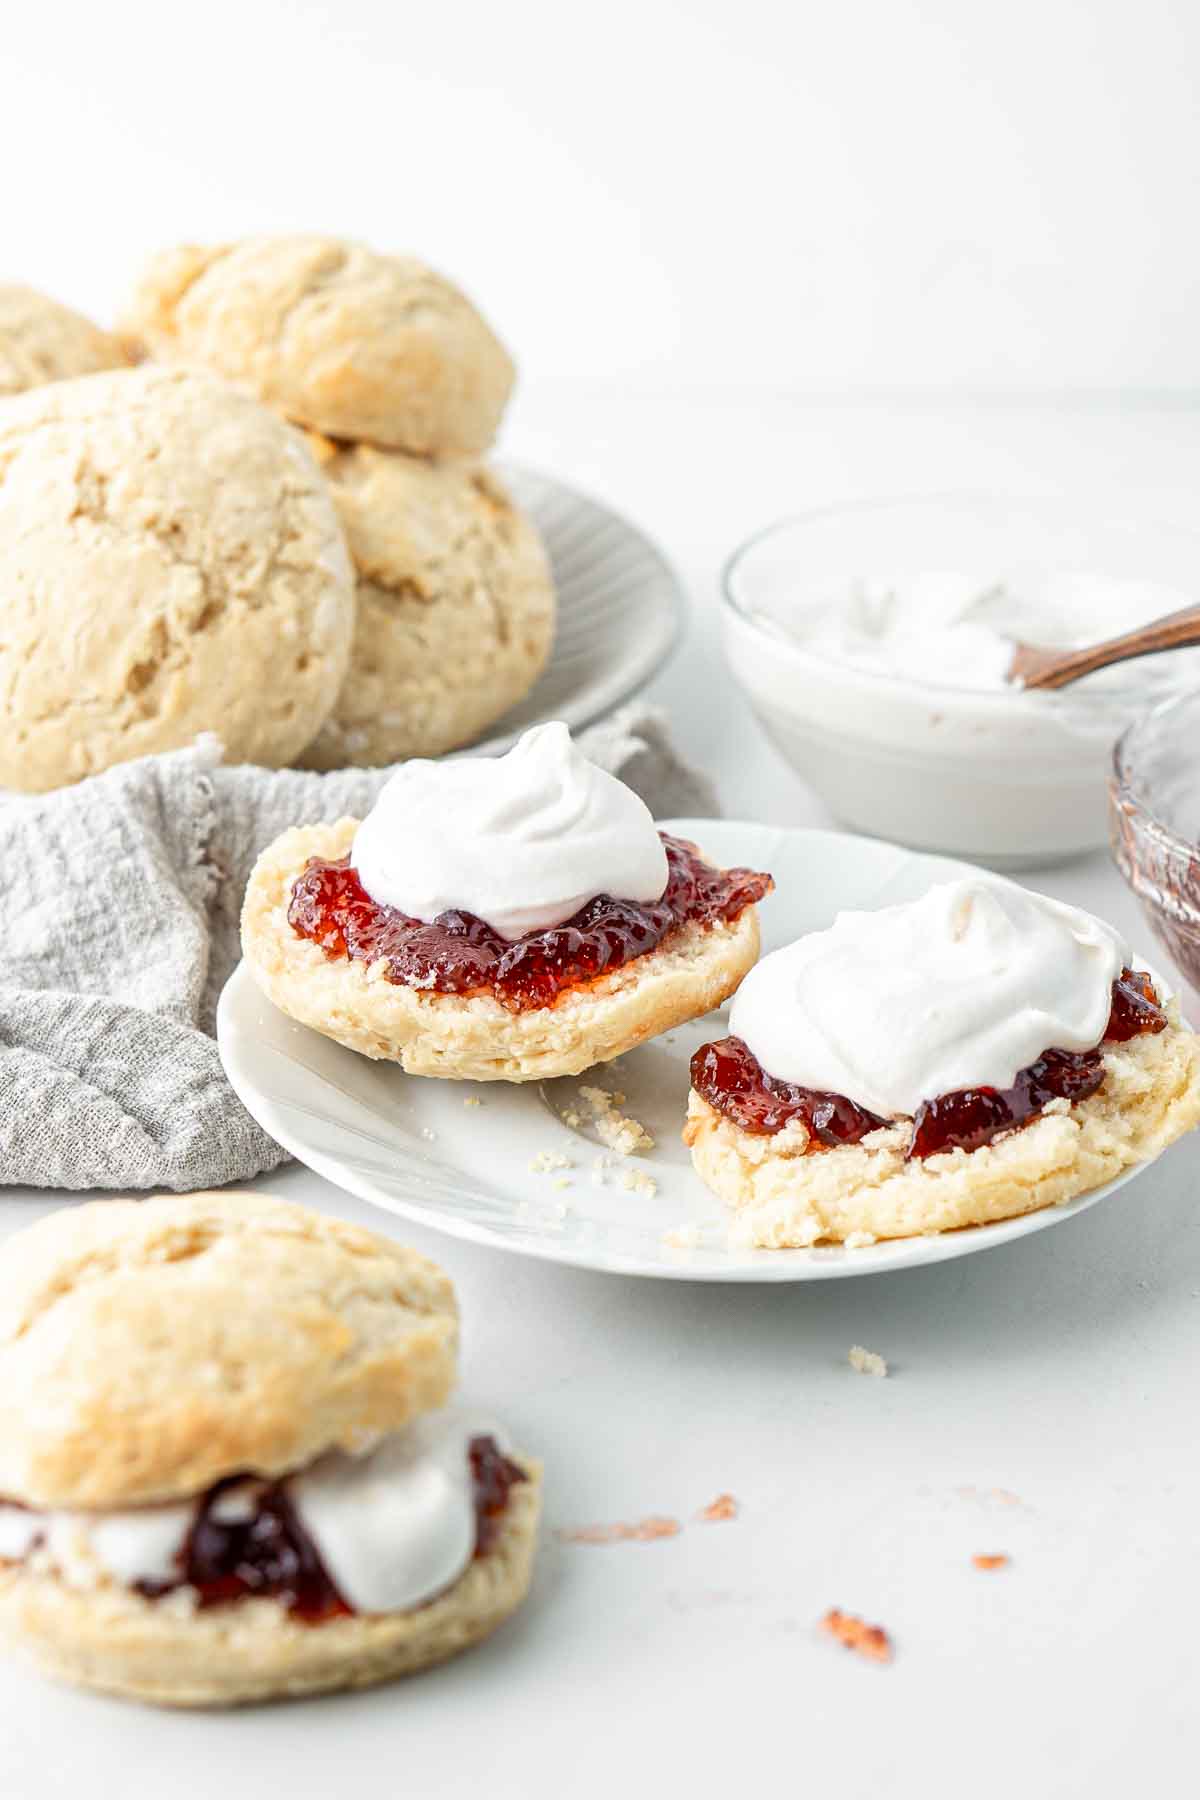 Scones with jam and cream on a white plate.